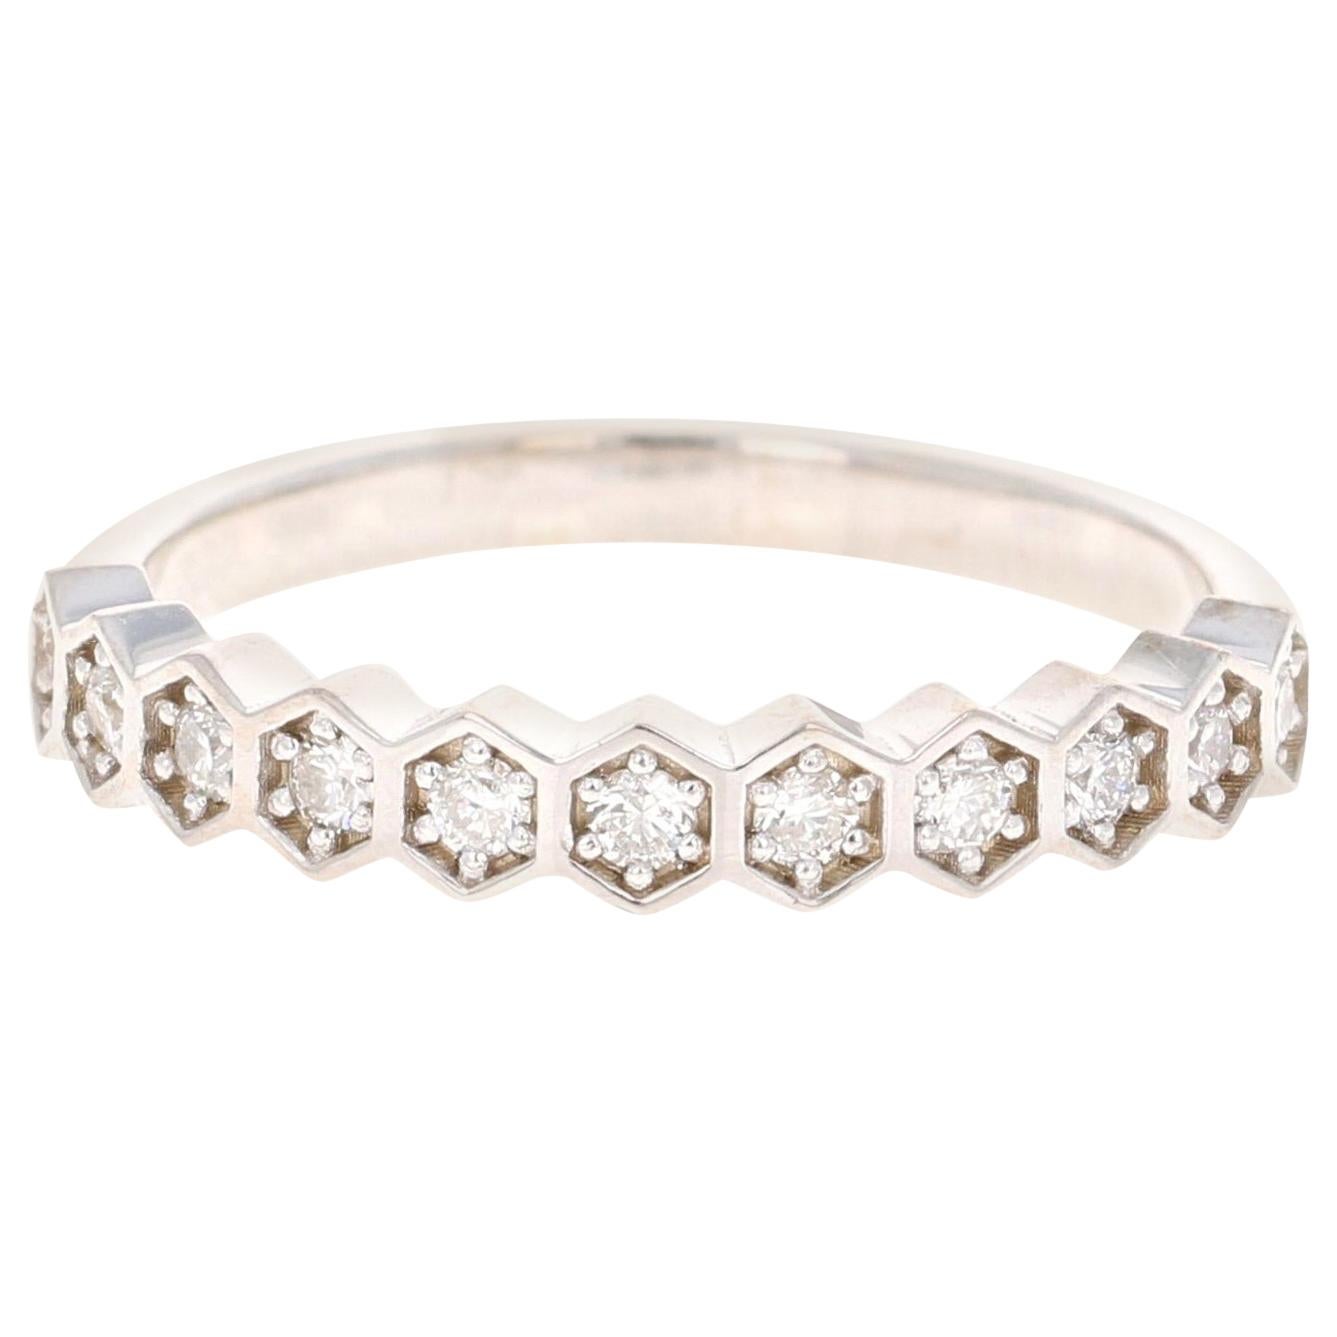 0.24 Carat Round Cut Diamond White Gold Stackable Band